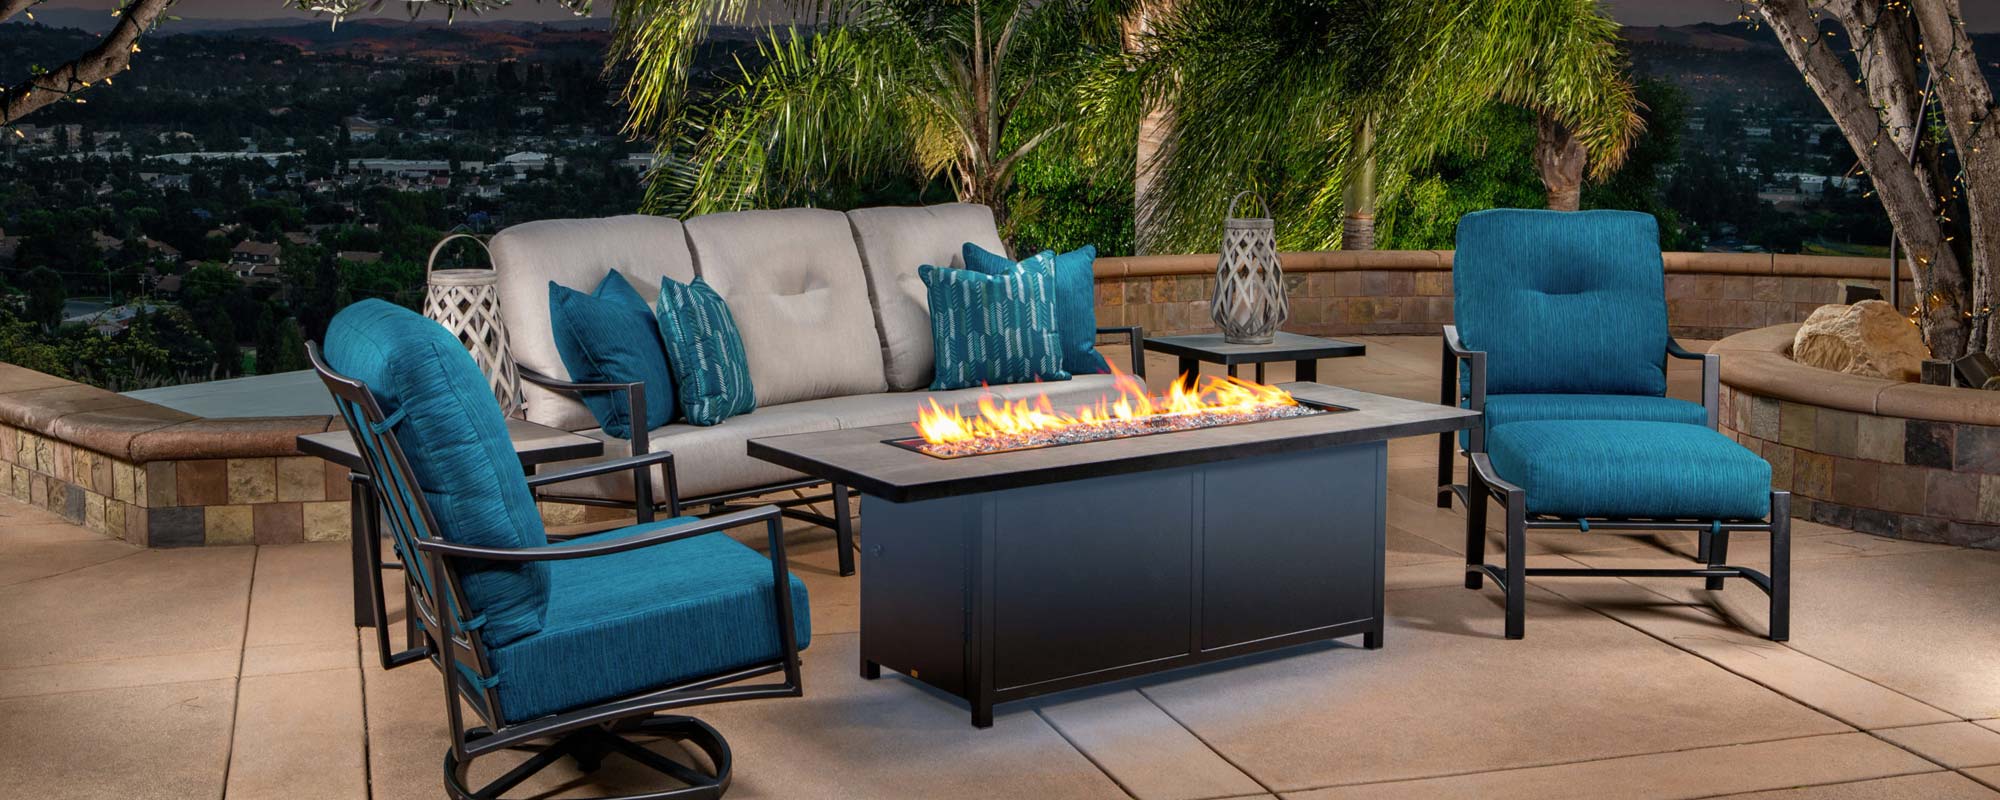 Avana 2020 seating with firepit